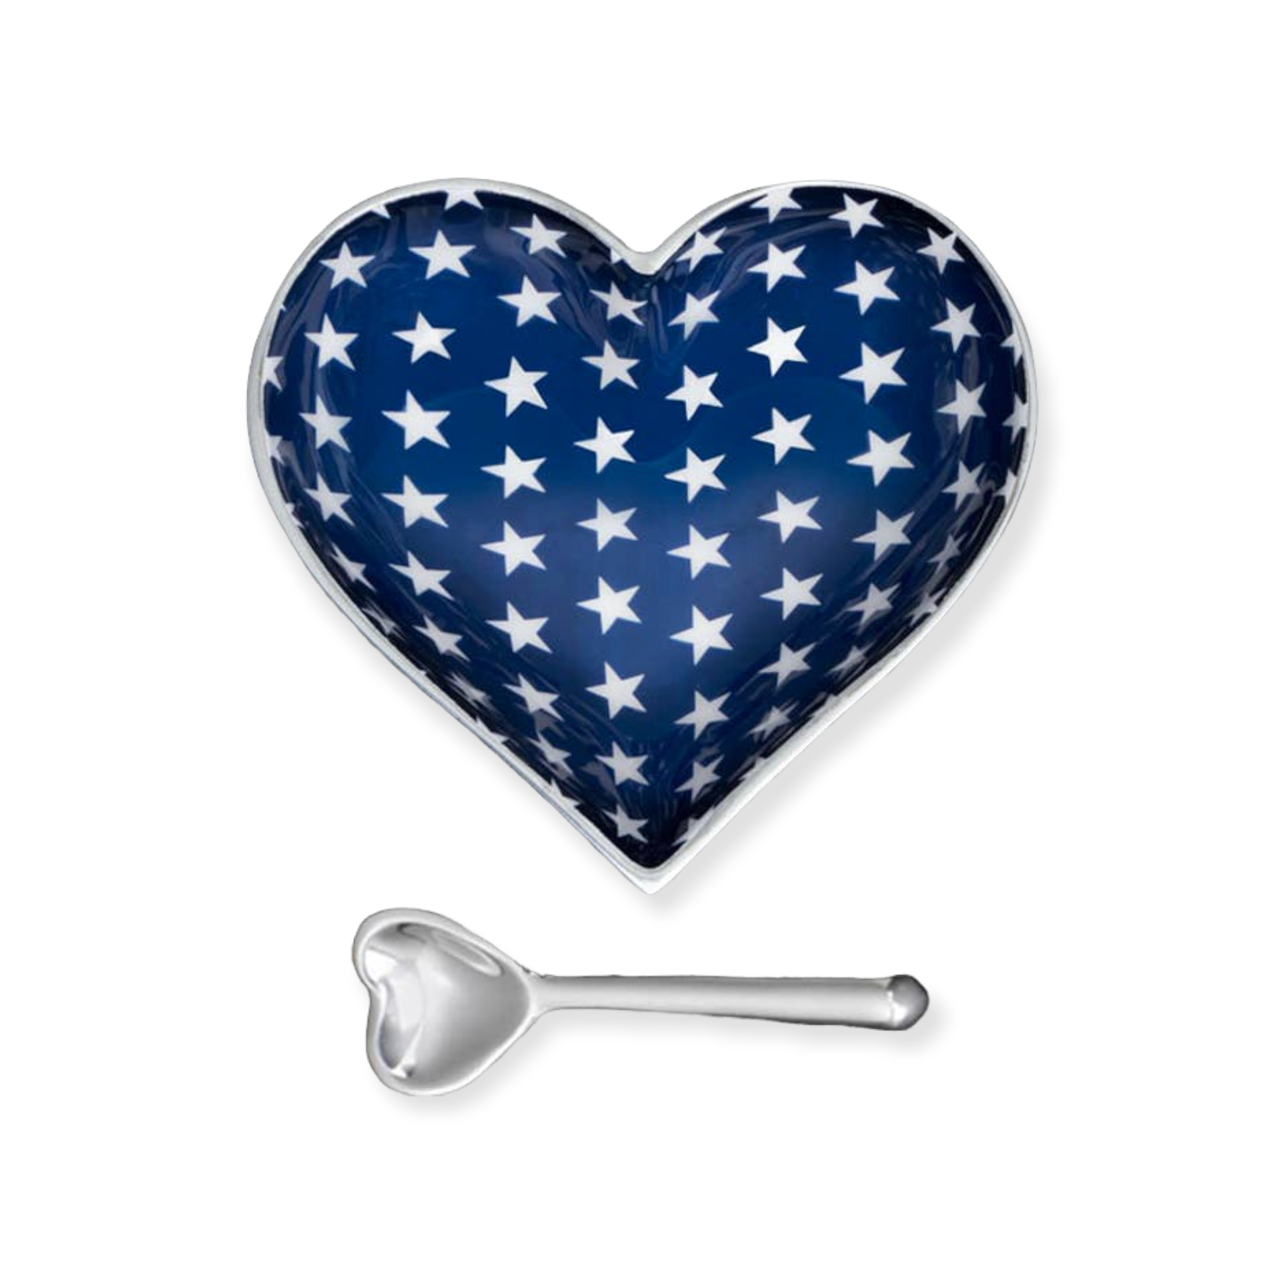 Happy Blue Heart White Star with Heart Spoon